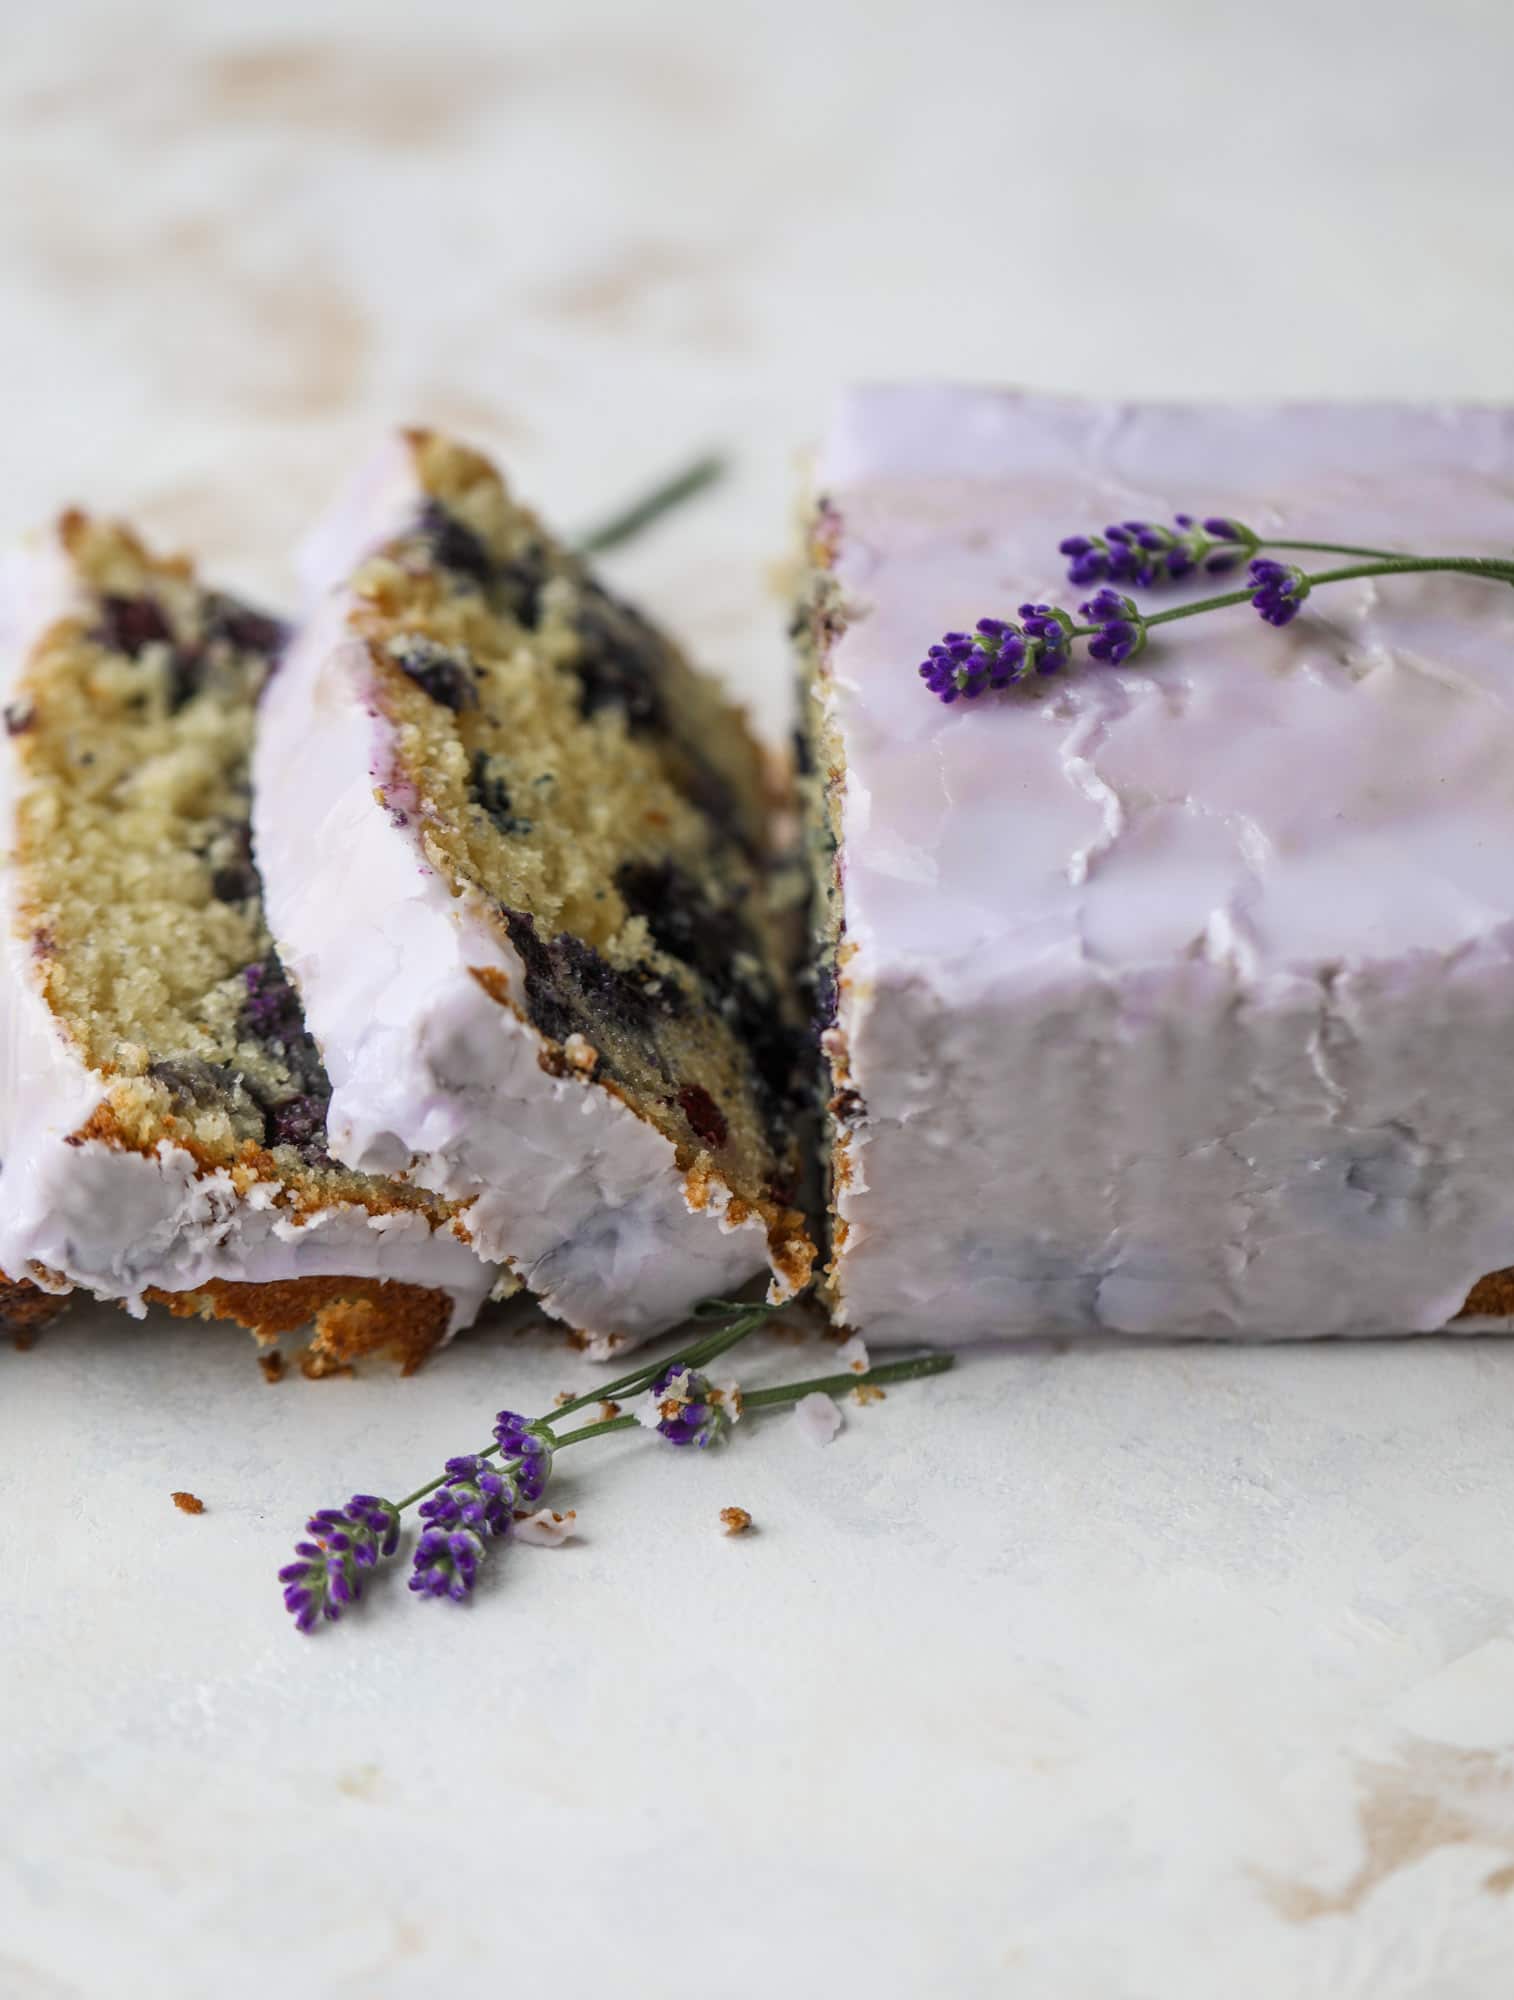 This lovely blueberry ricotta cake is covered in a lavender glaze and the perfect recipe for blueberry season! It's rich and light and super flavorful.